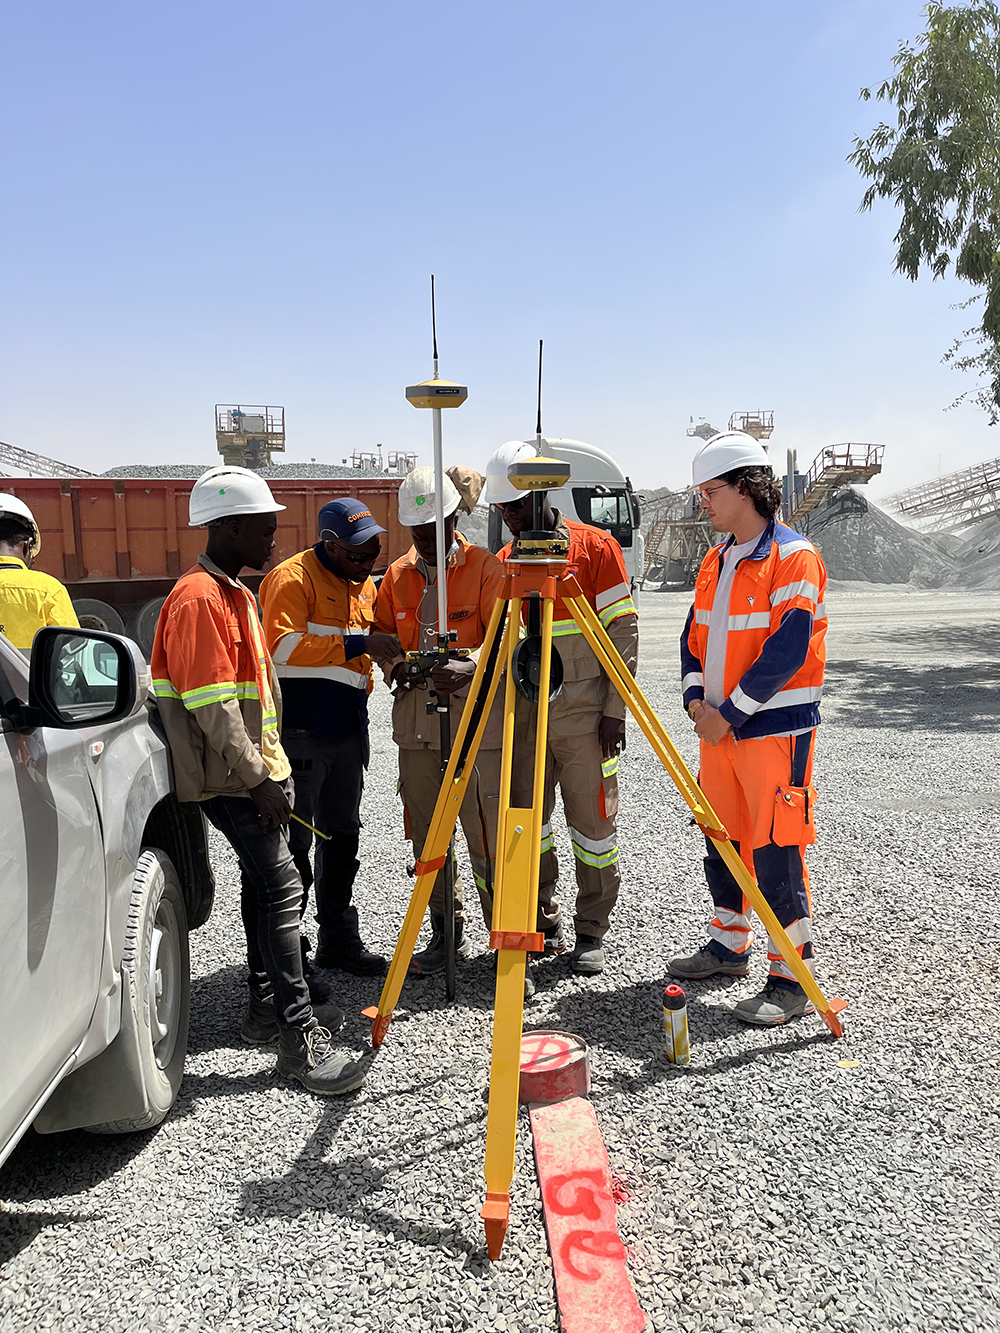 Topcon was able to deliver a solution to meet the needs of its client in Senegal